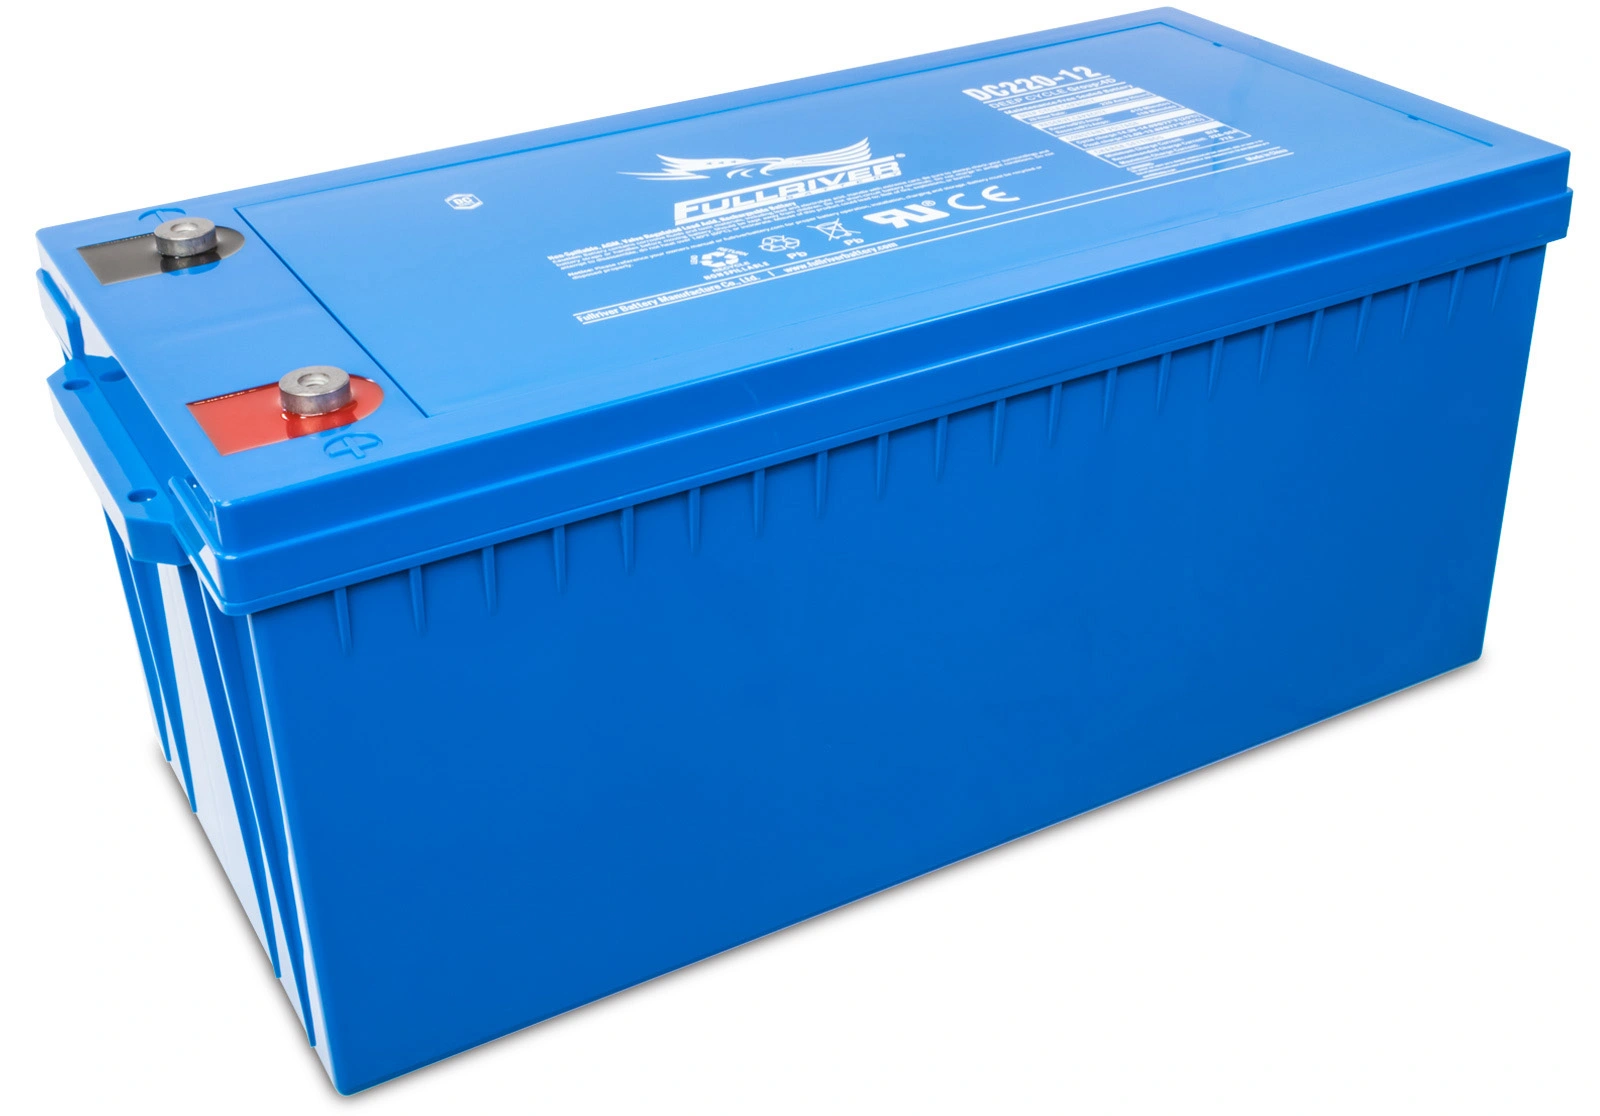 DC Series DC220-12 AGM battery from Fullriver Battery